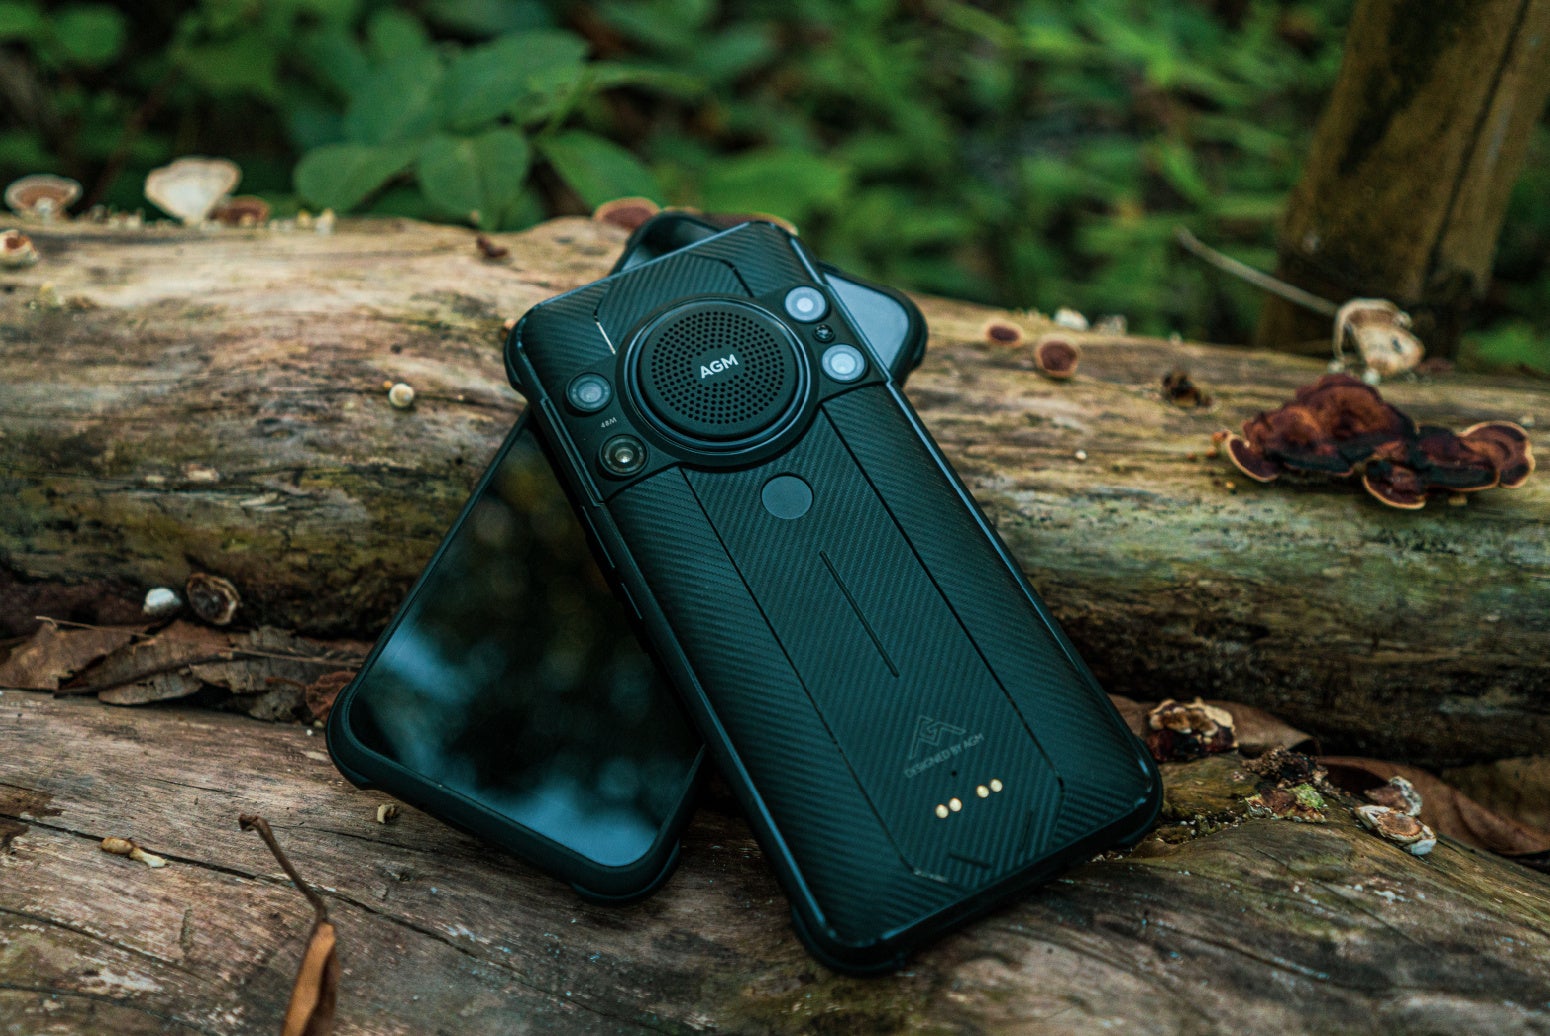 The best phone for camping and hiking?  AGM H5 Pro - Big Tough Battery, 109dB Speaker!